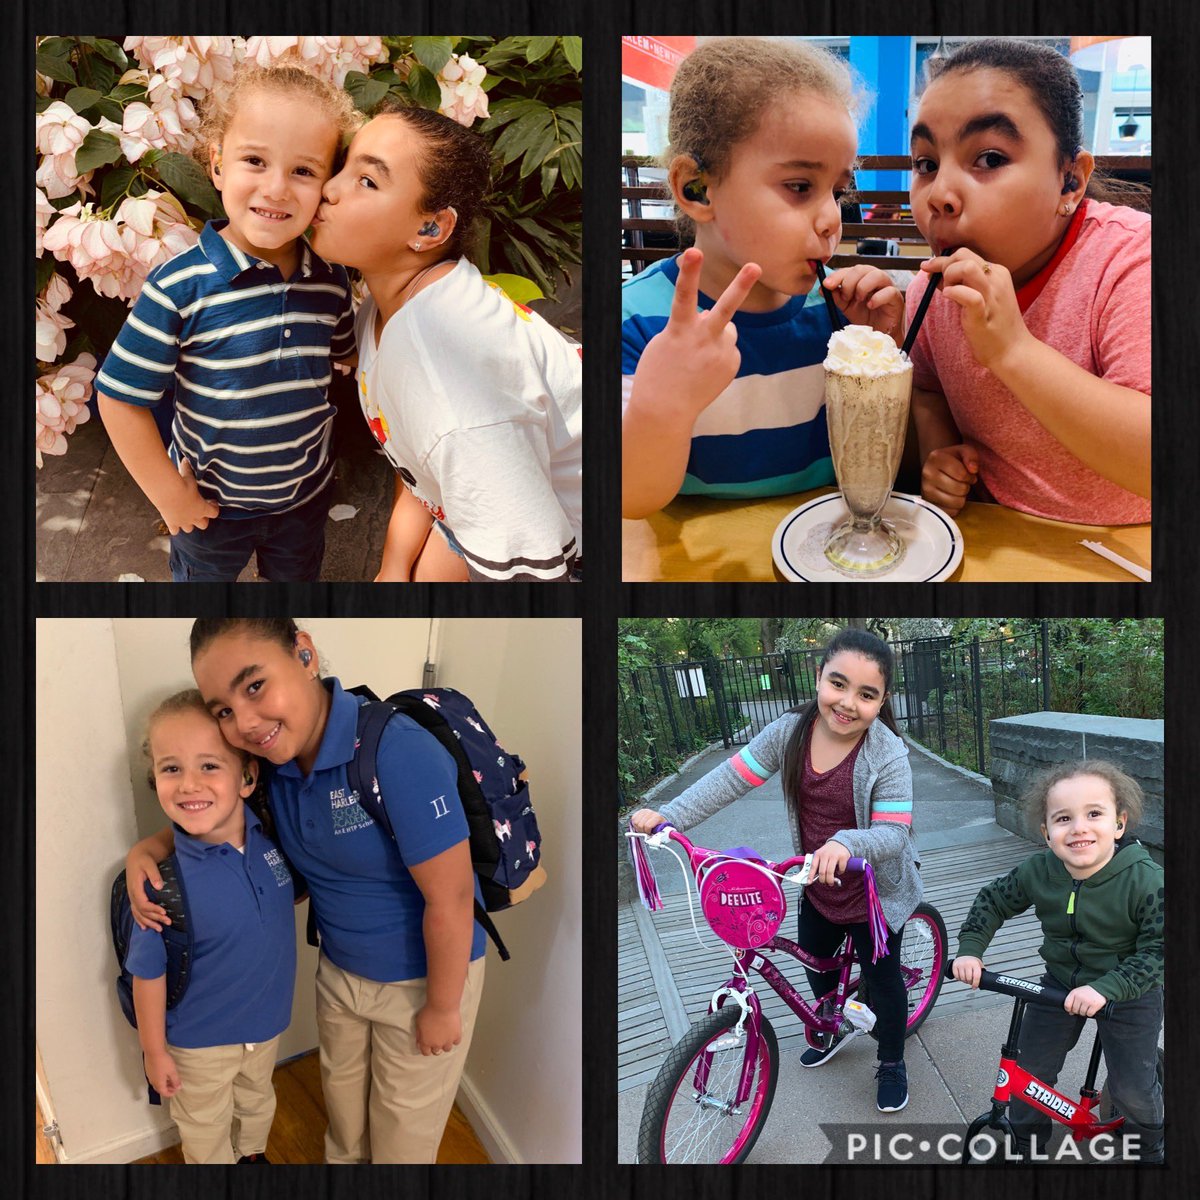 My Madison & CJ are the reasons why I’m #SoDedicated They wow me every day with the things they learn and the crazy things they say. They fuel me 💙💖 You’d be surprised what kids teach you in life. #TeamEmpireNYC #NYNJStateOfMind @MaxAcevedo8 @Danny_Perez_01